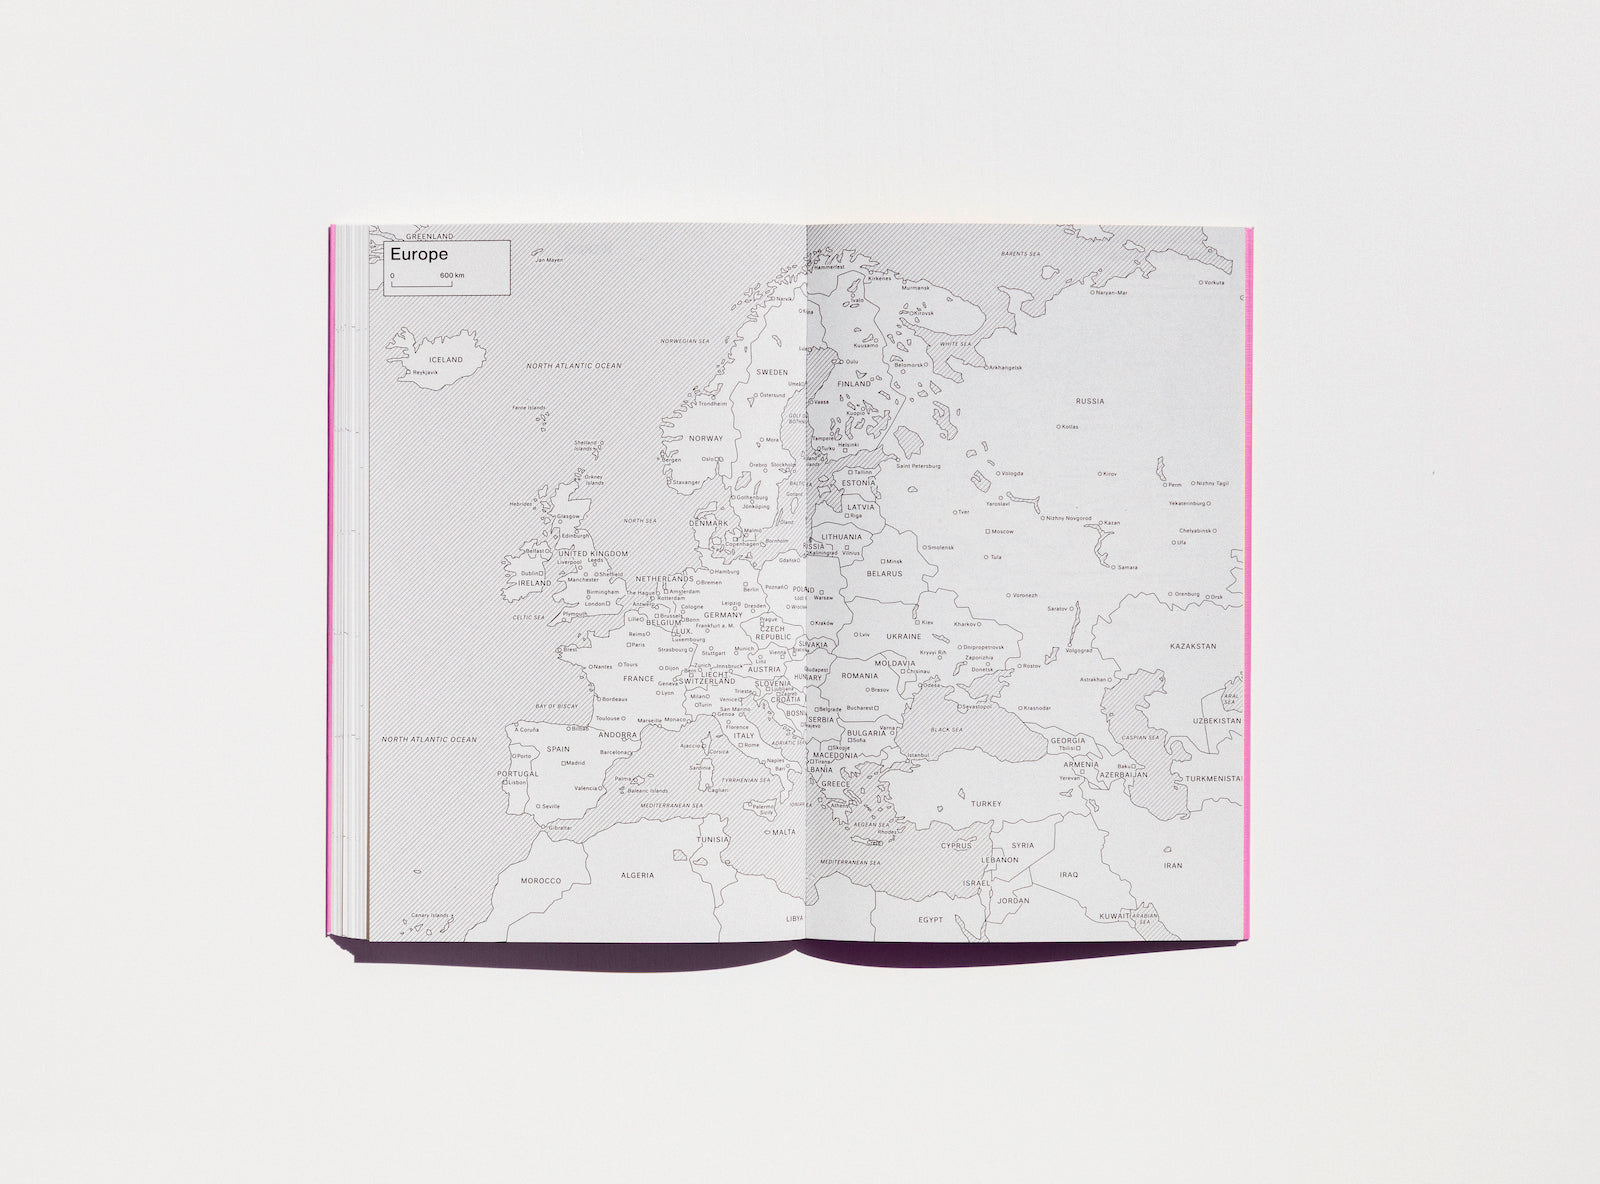 Spread from our 2020 planner showing the Europe map.